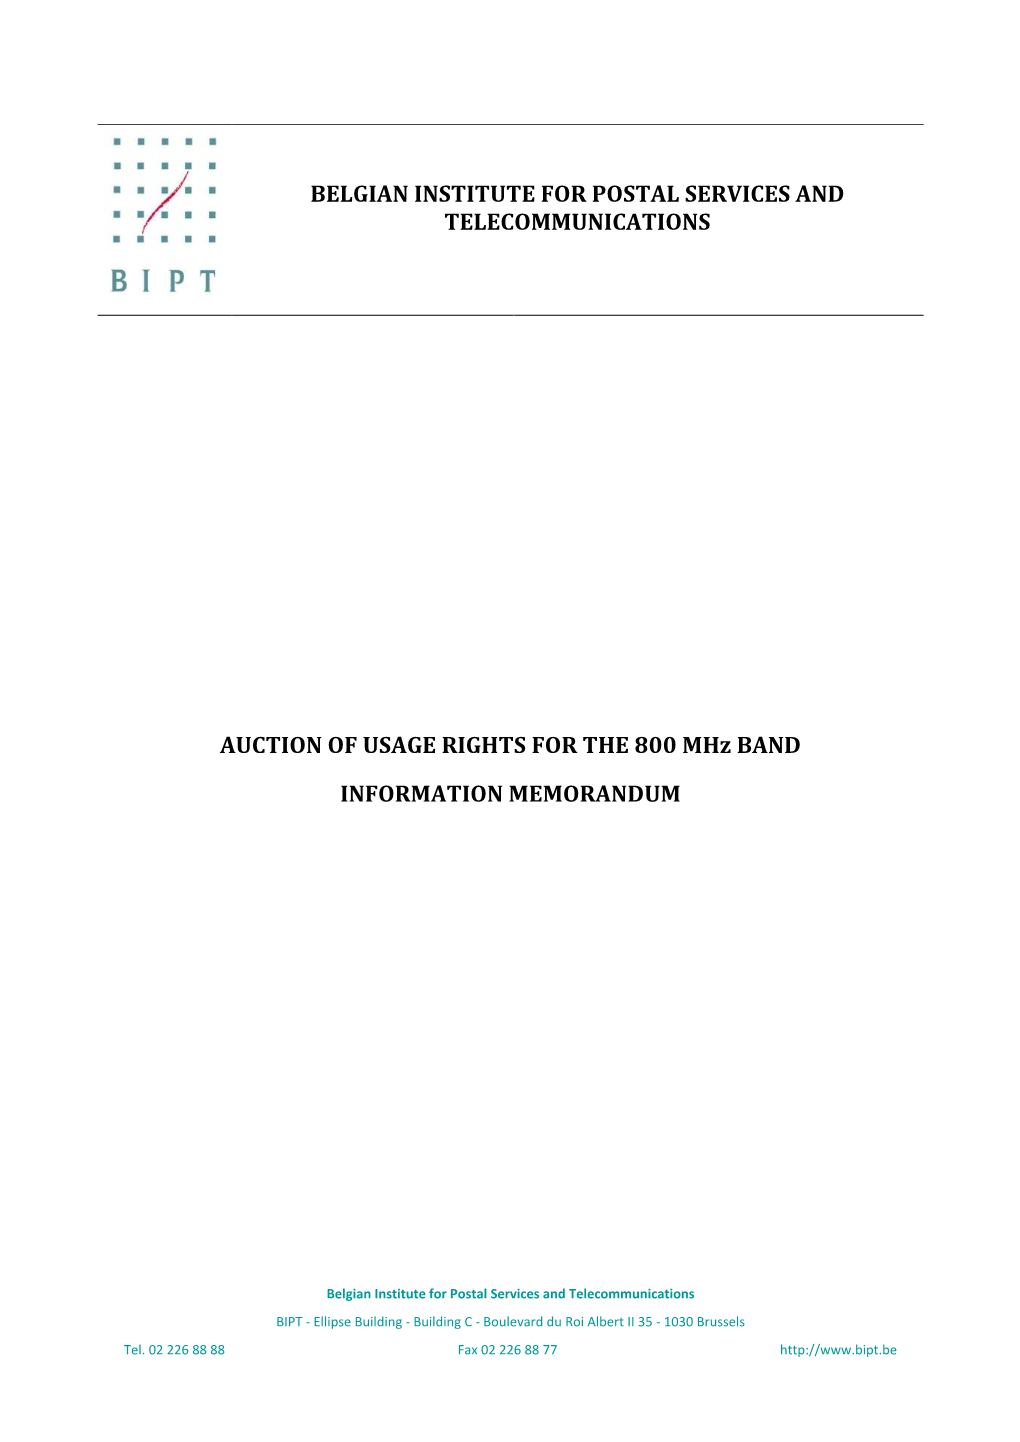 Auction of Usage Rights for the 800 Mhz Band : Information Memorandum